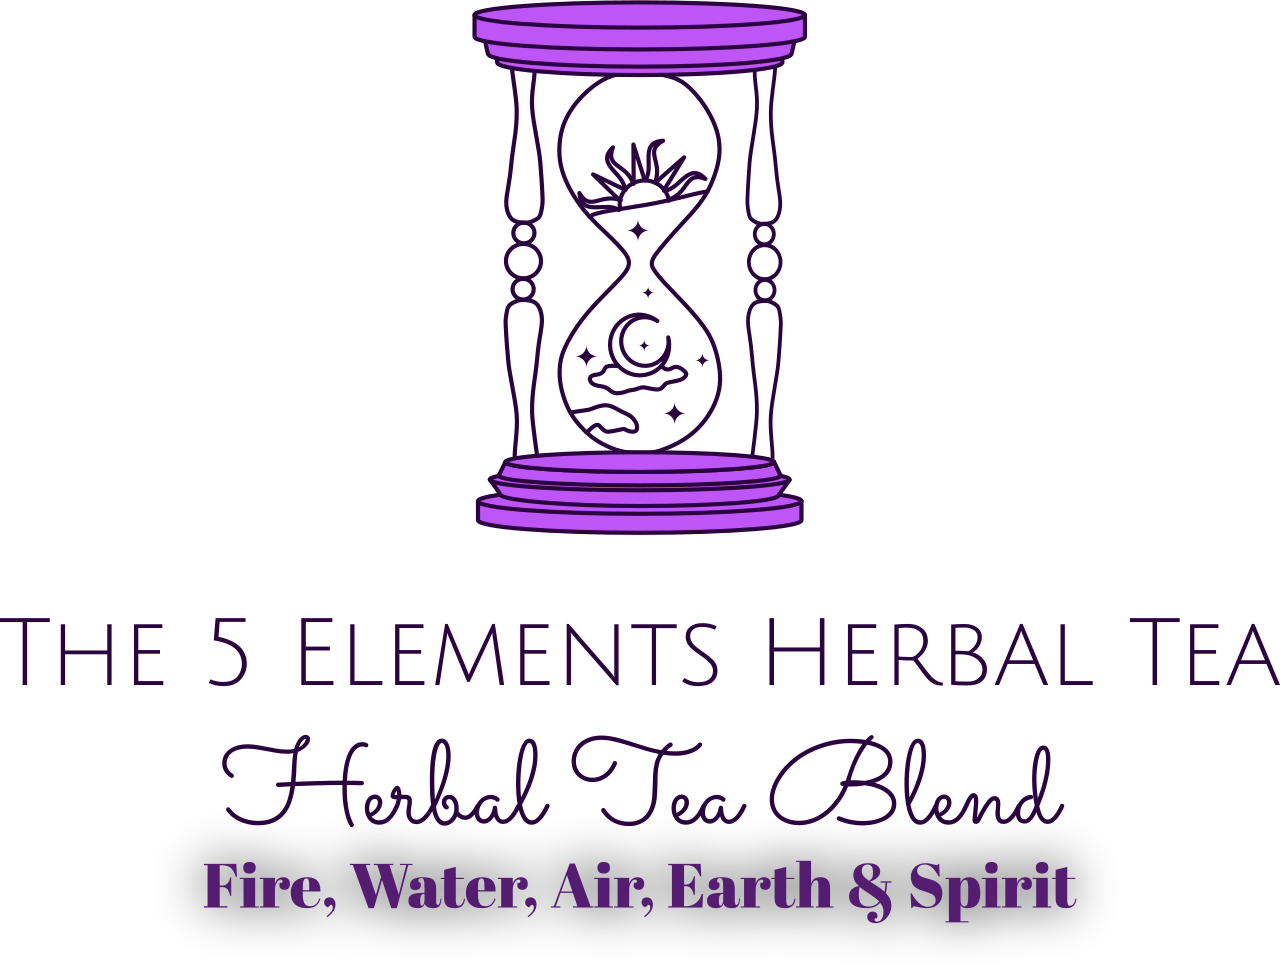 The 5 Elements Herbal Tea's web page